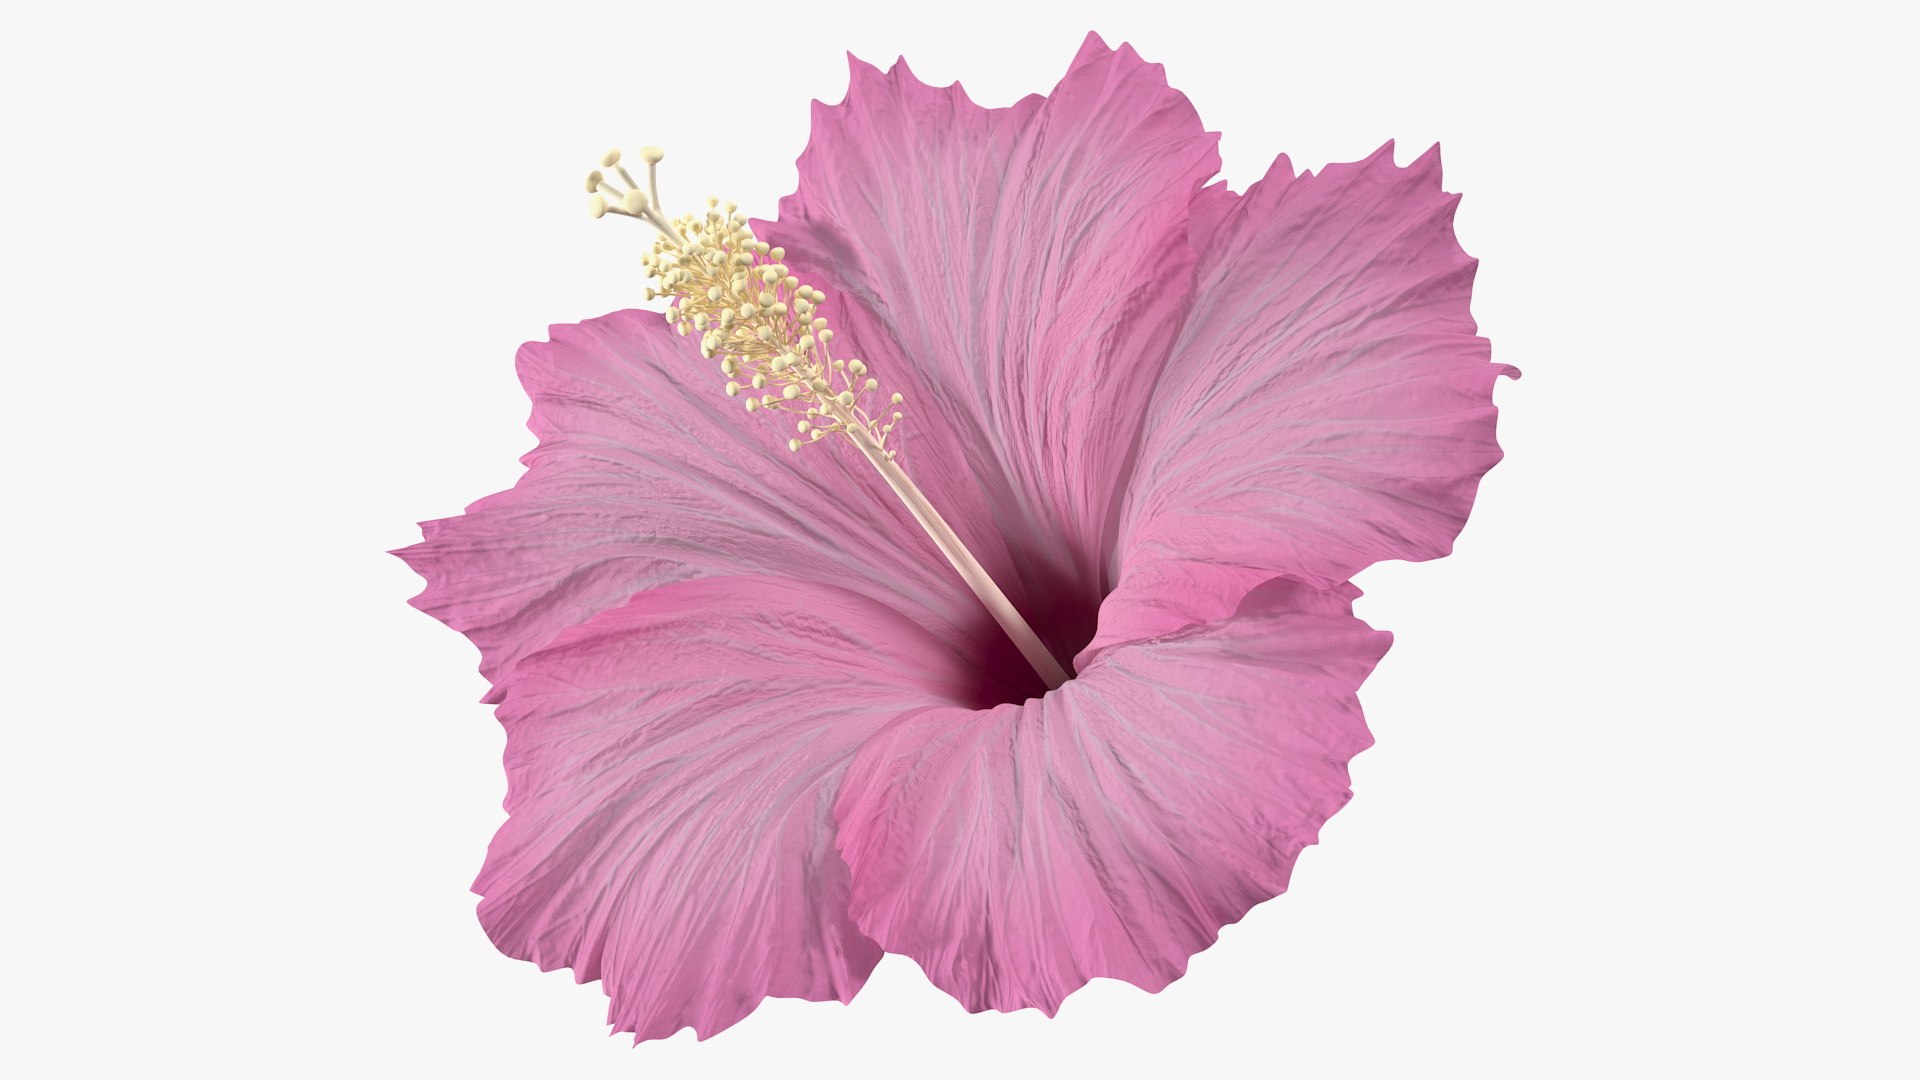 Texas Rangers Pink Hibiscus Yellow Pink Orchid White Background 3D